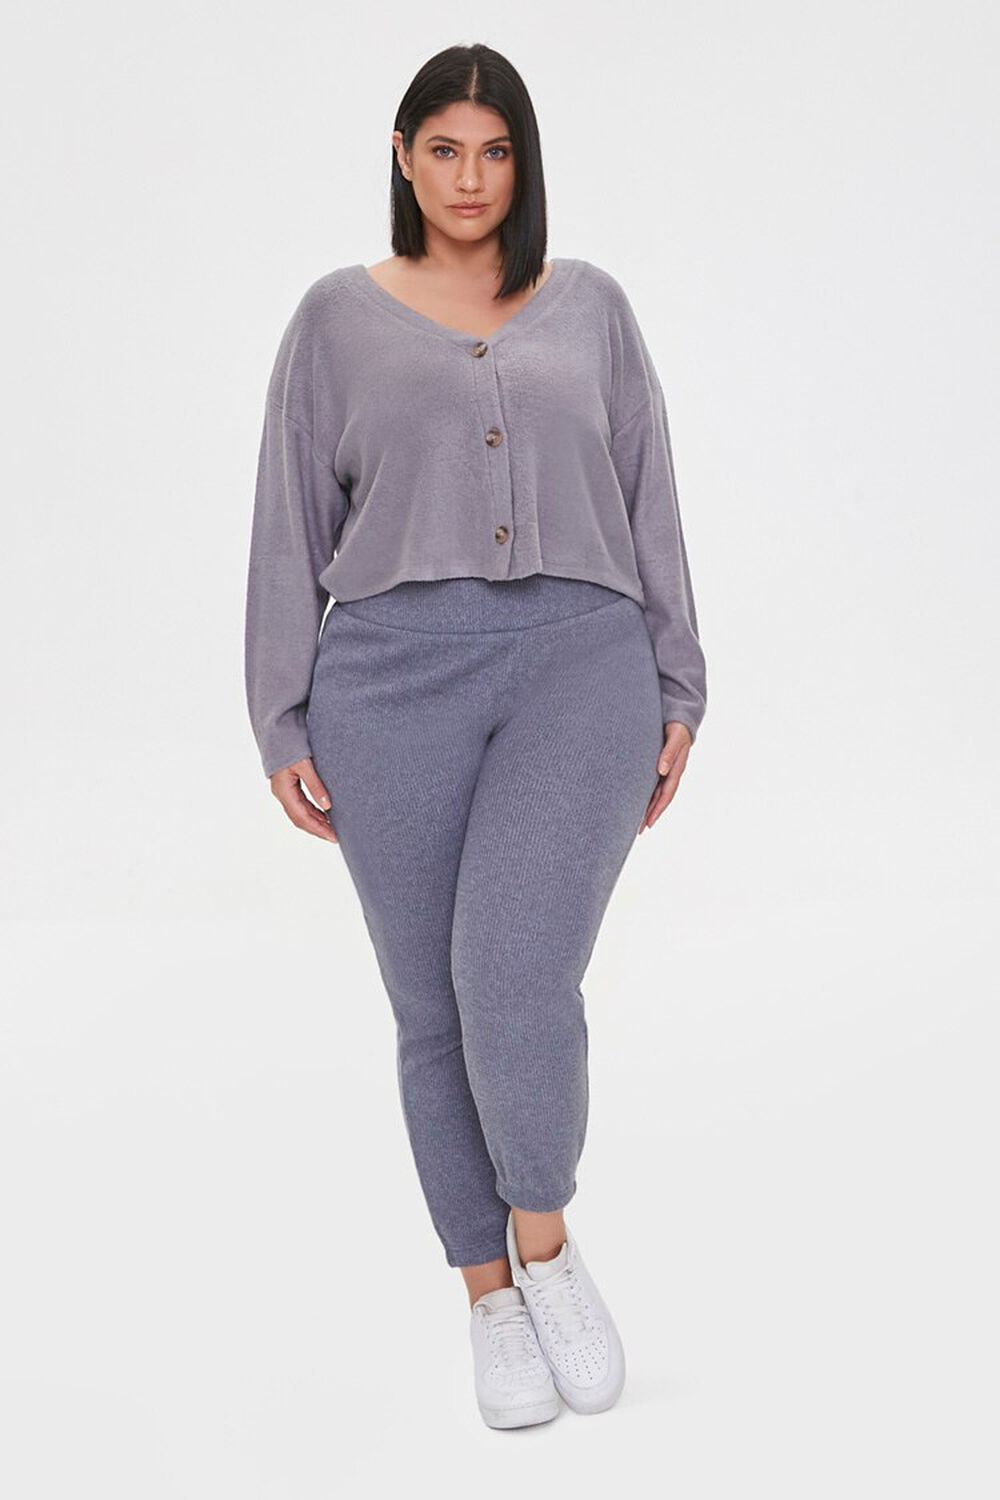 CHARCOAL Plus Size Ribbed Knit Joggers, image 1